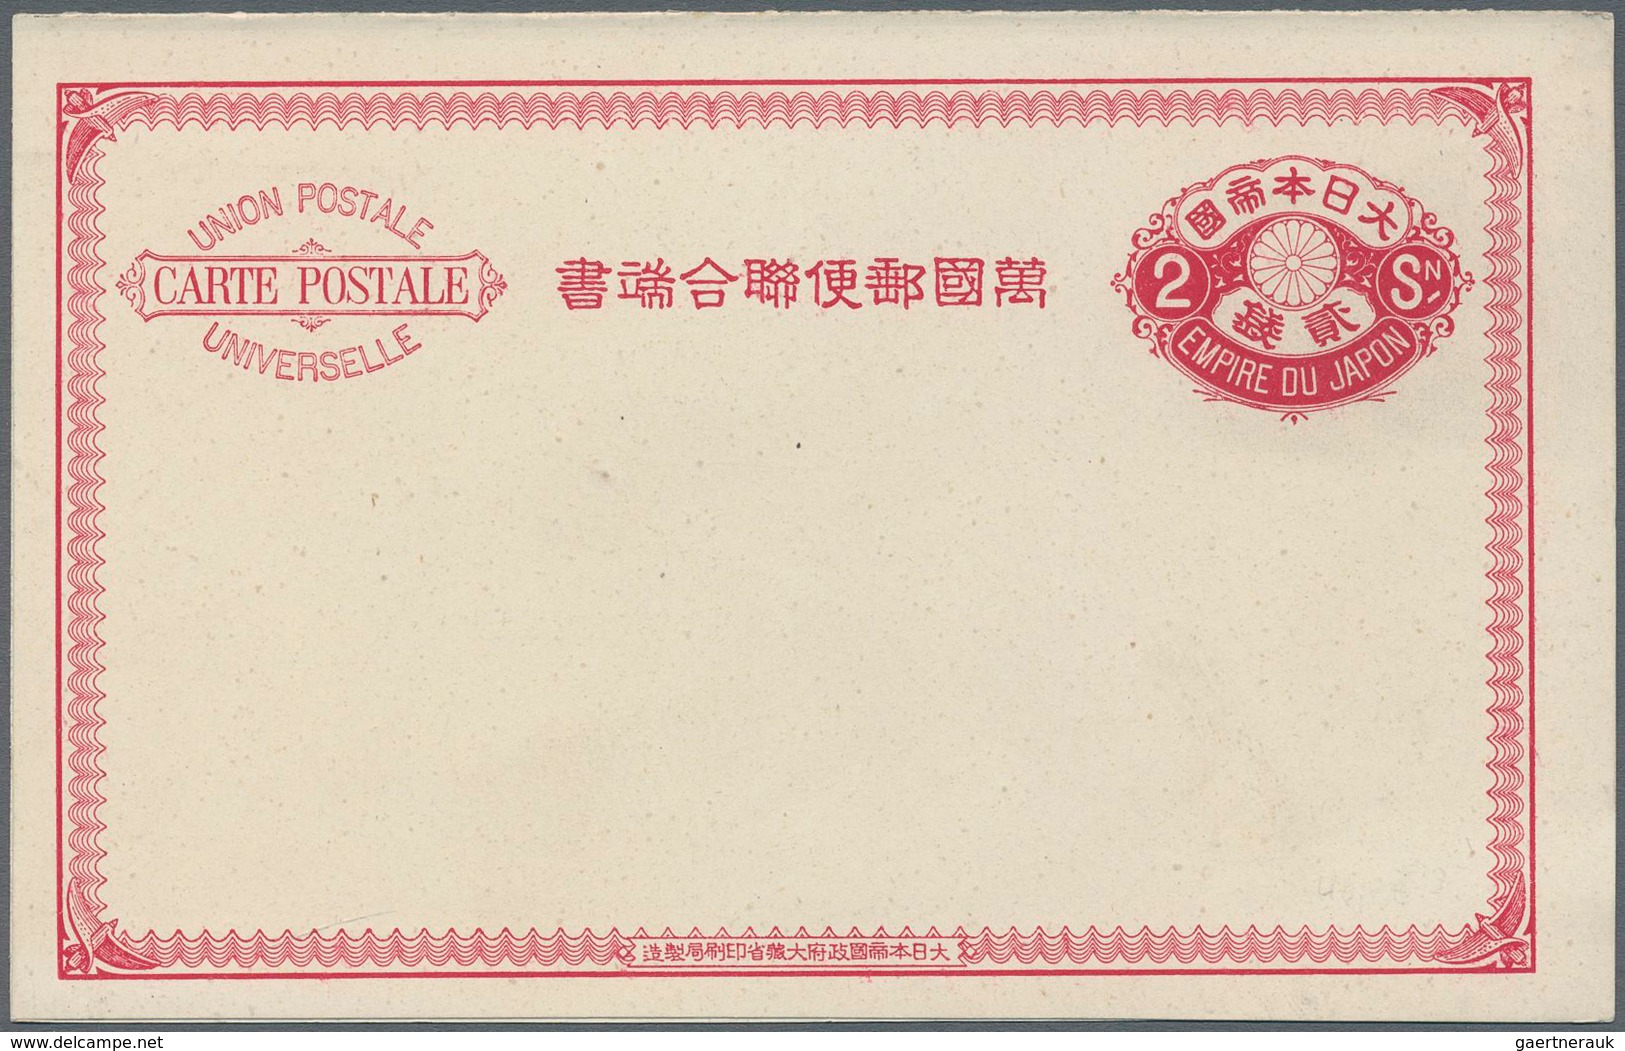 22956 Japan - Ganzsachen: 1874/1922, mint and used old-time collection. Inc. uprates, used foreign, severa